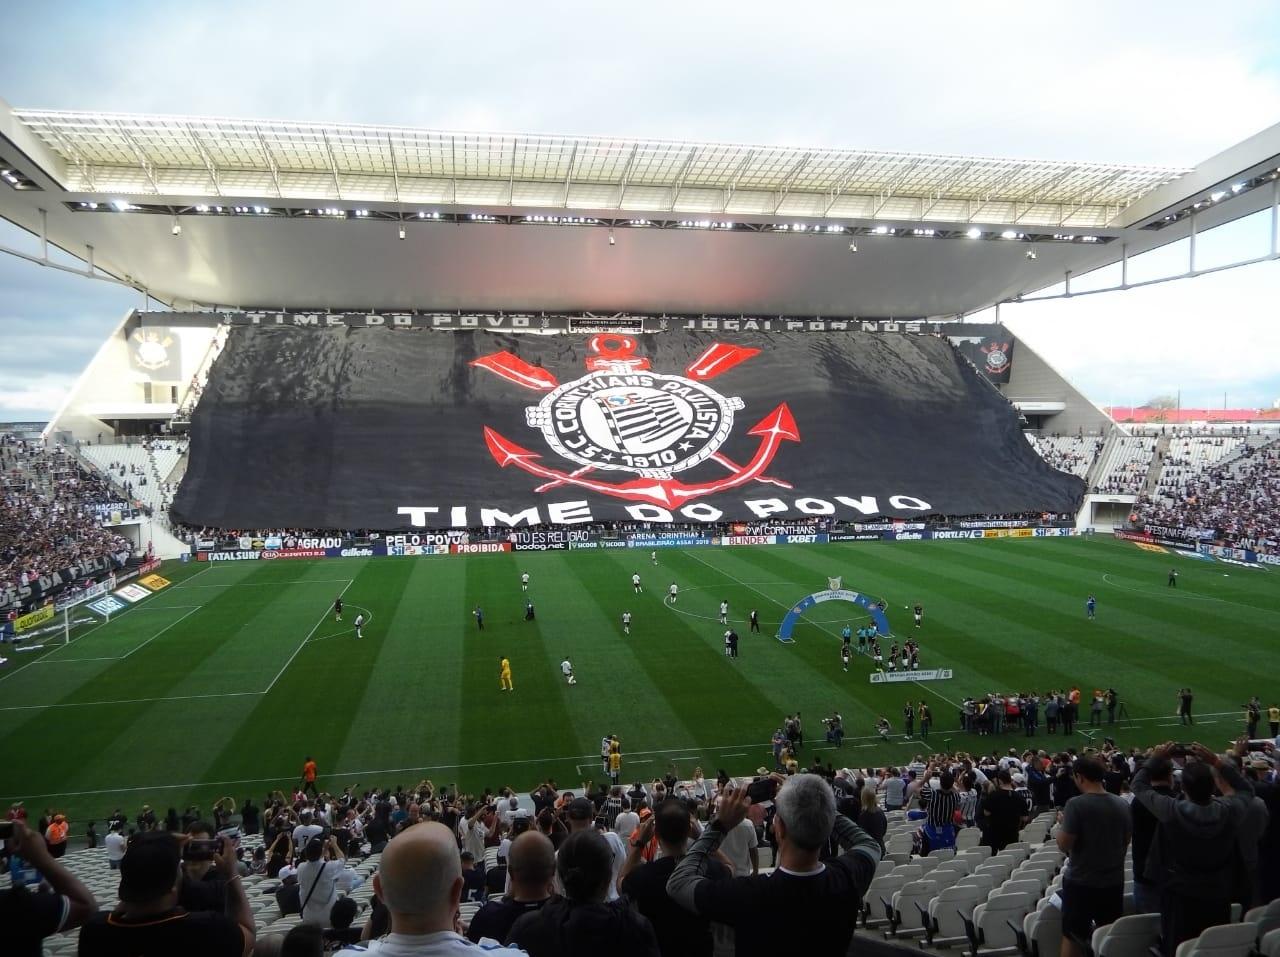 Corinthians denies that it has committed "any act of corruption".